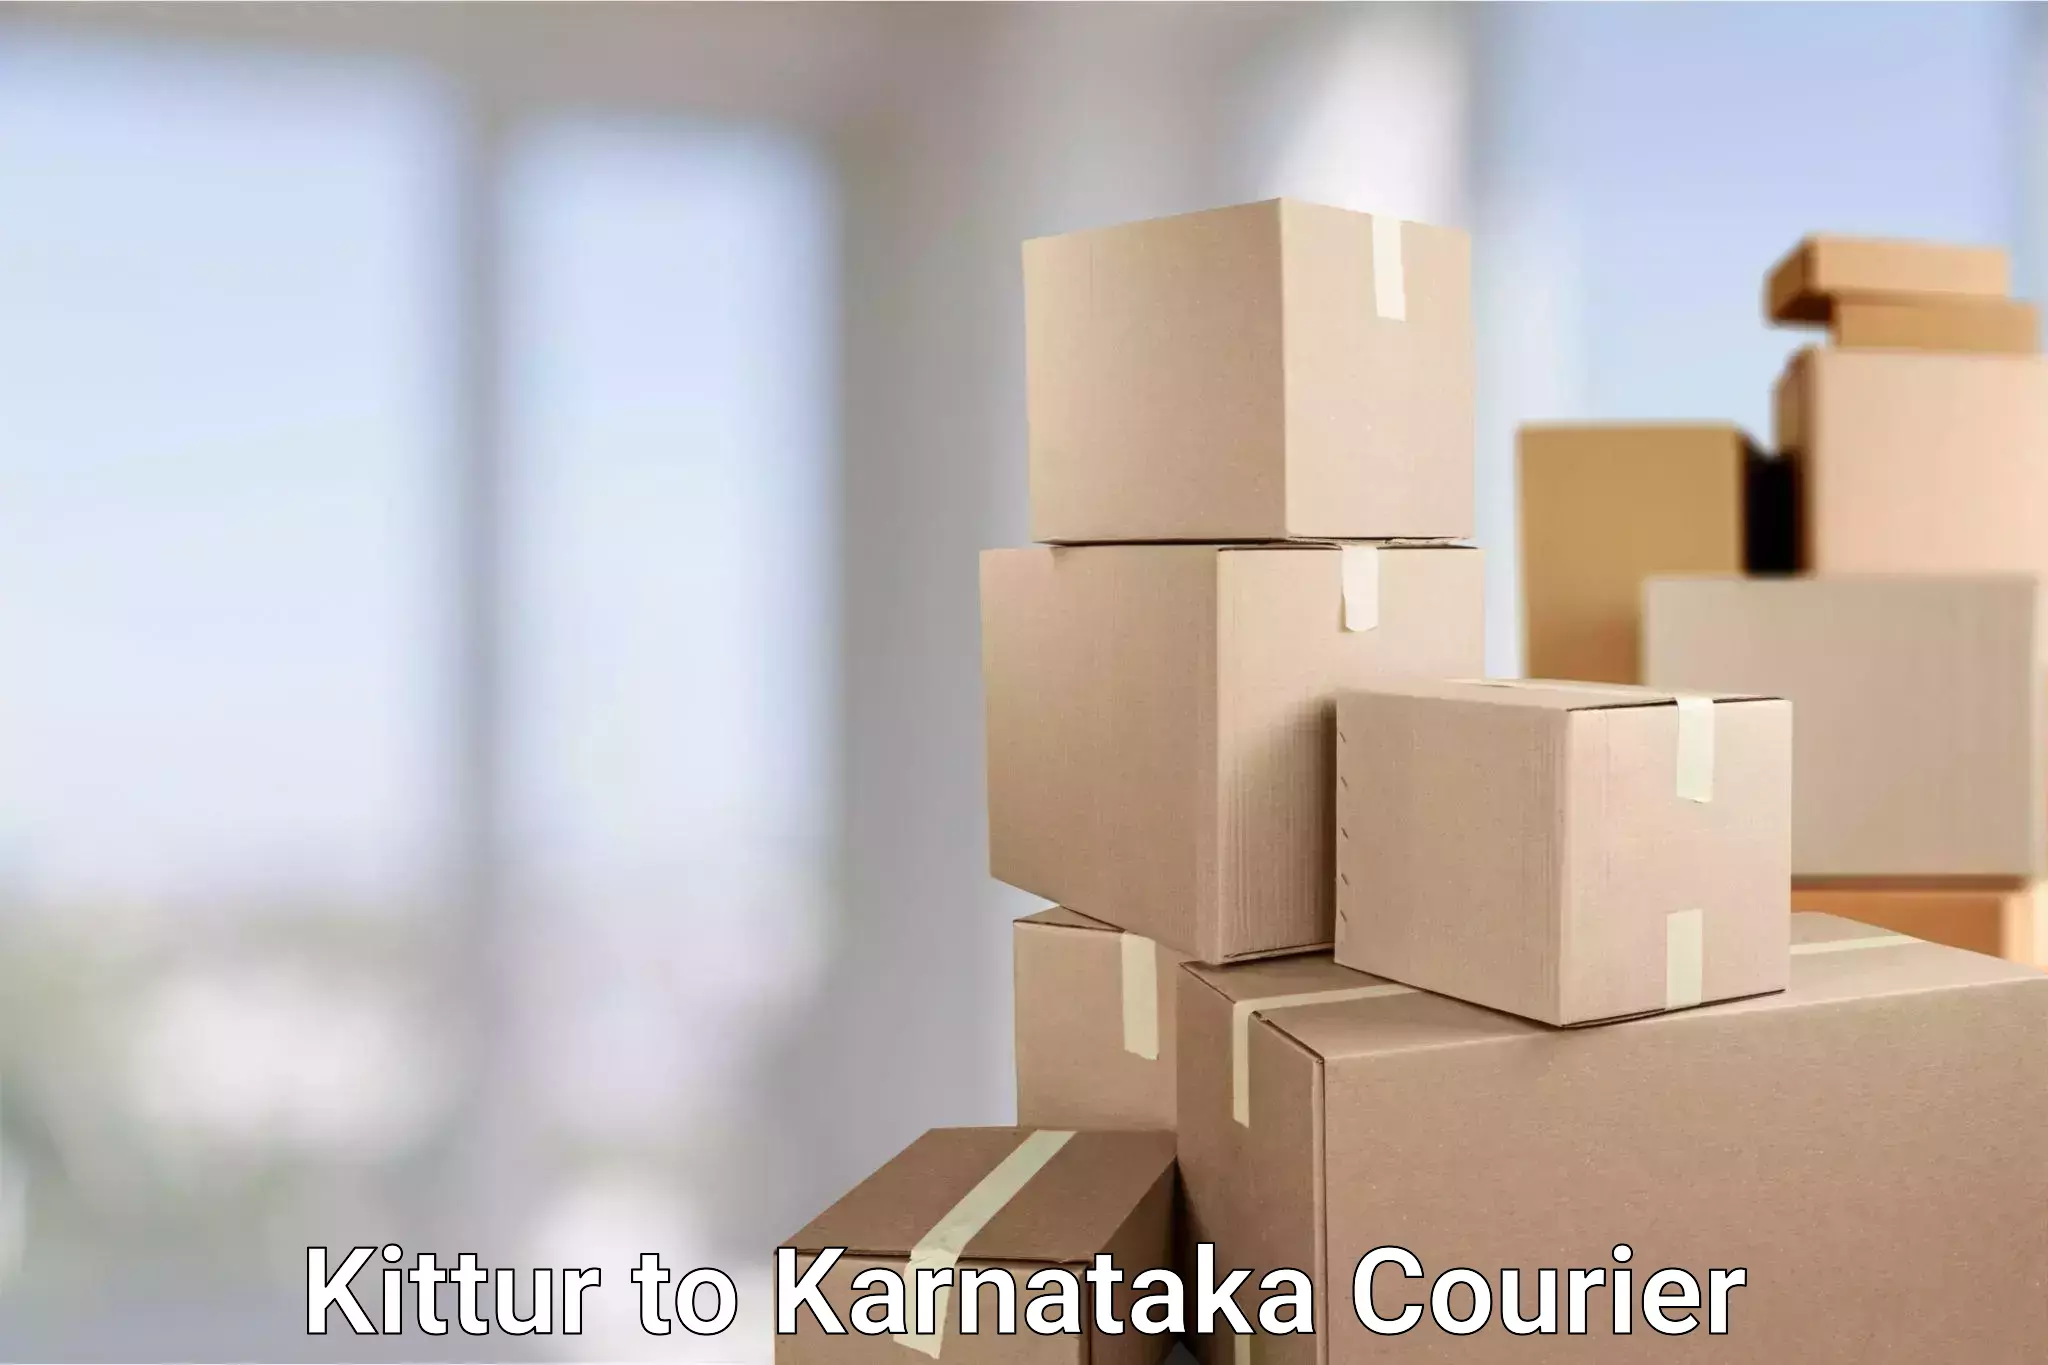 High-priority parcel service Kittur to Bagalkot